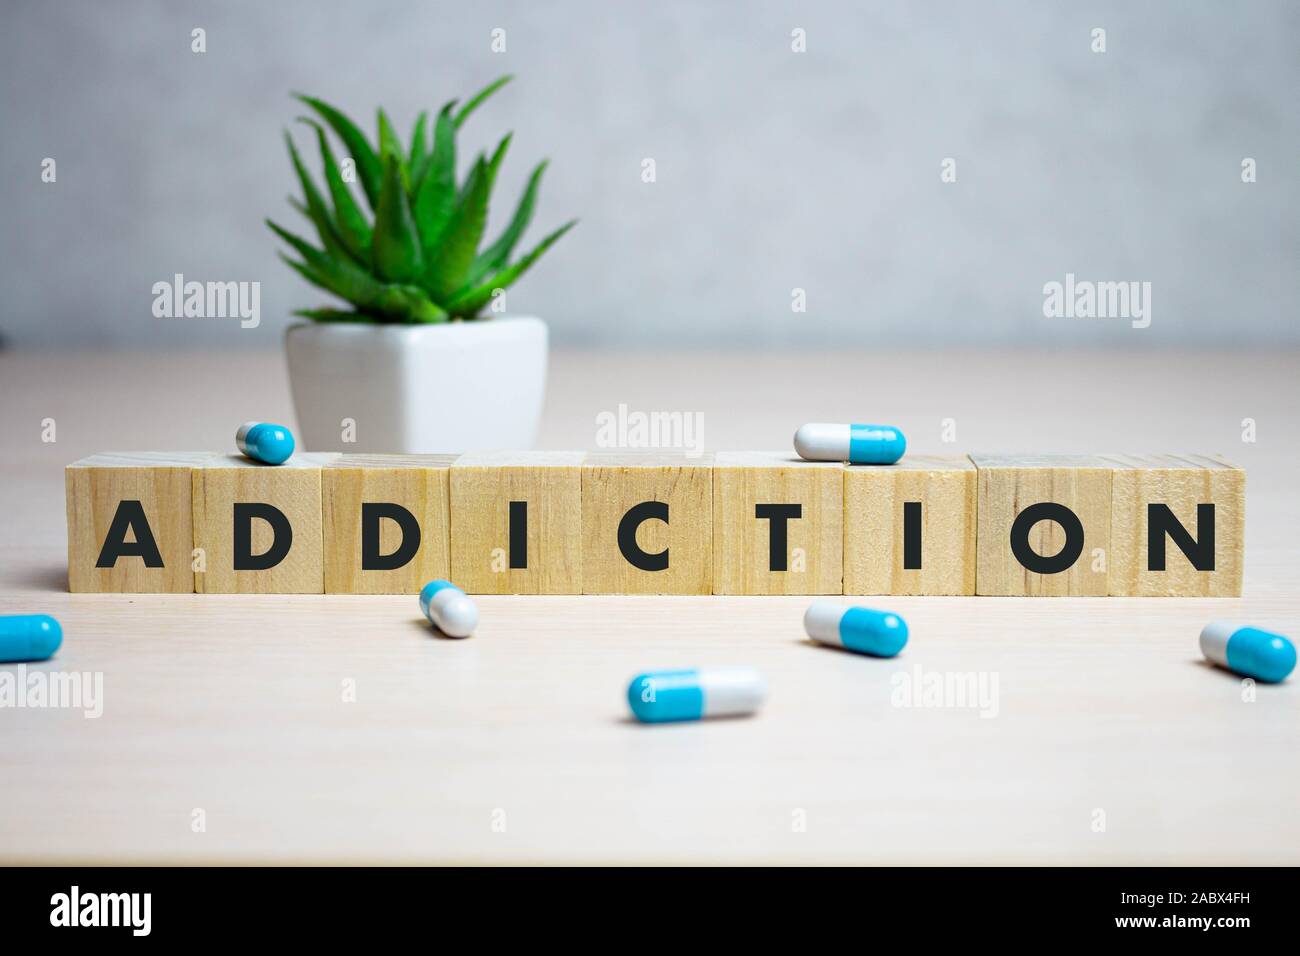 ADDICTION word made with building blocks, medical concept Stock Photo